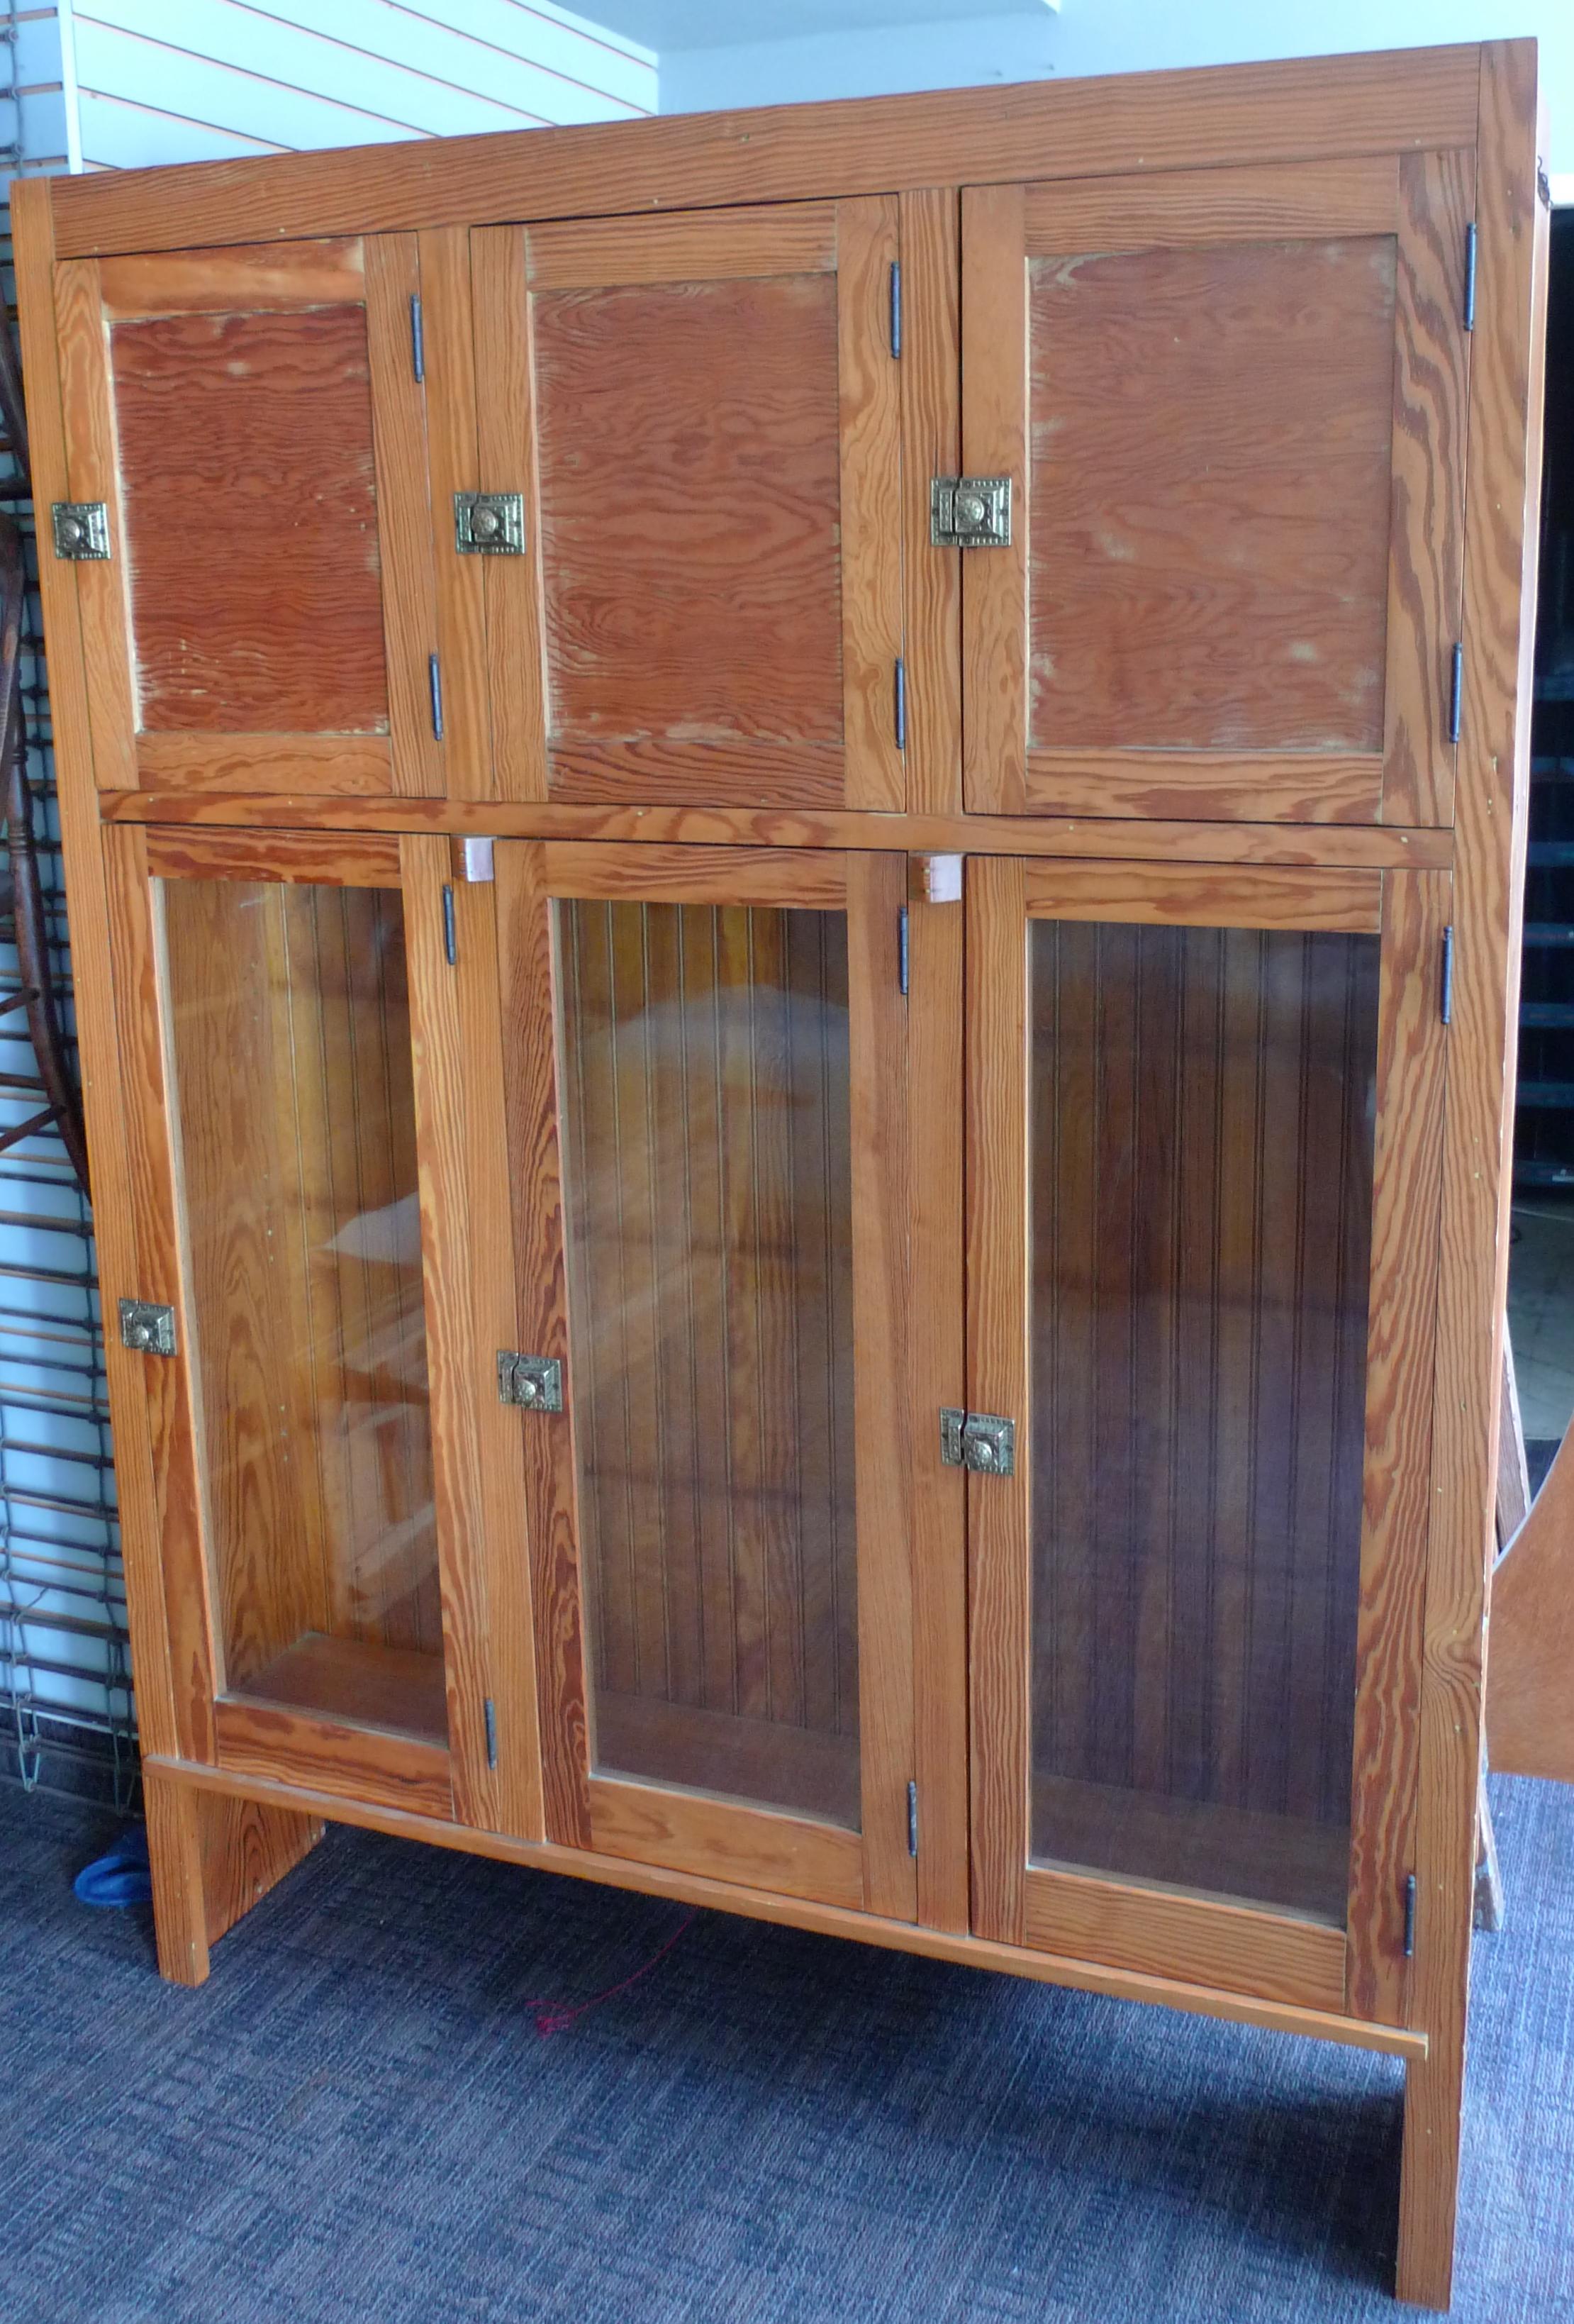 American Cabinet for Kitchen Dining Room Storage from Historic Chicago Pullman Home 1920s For Sale